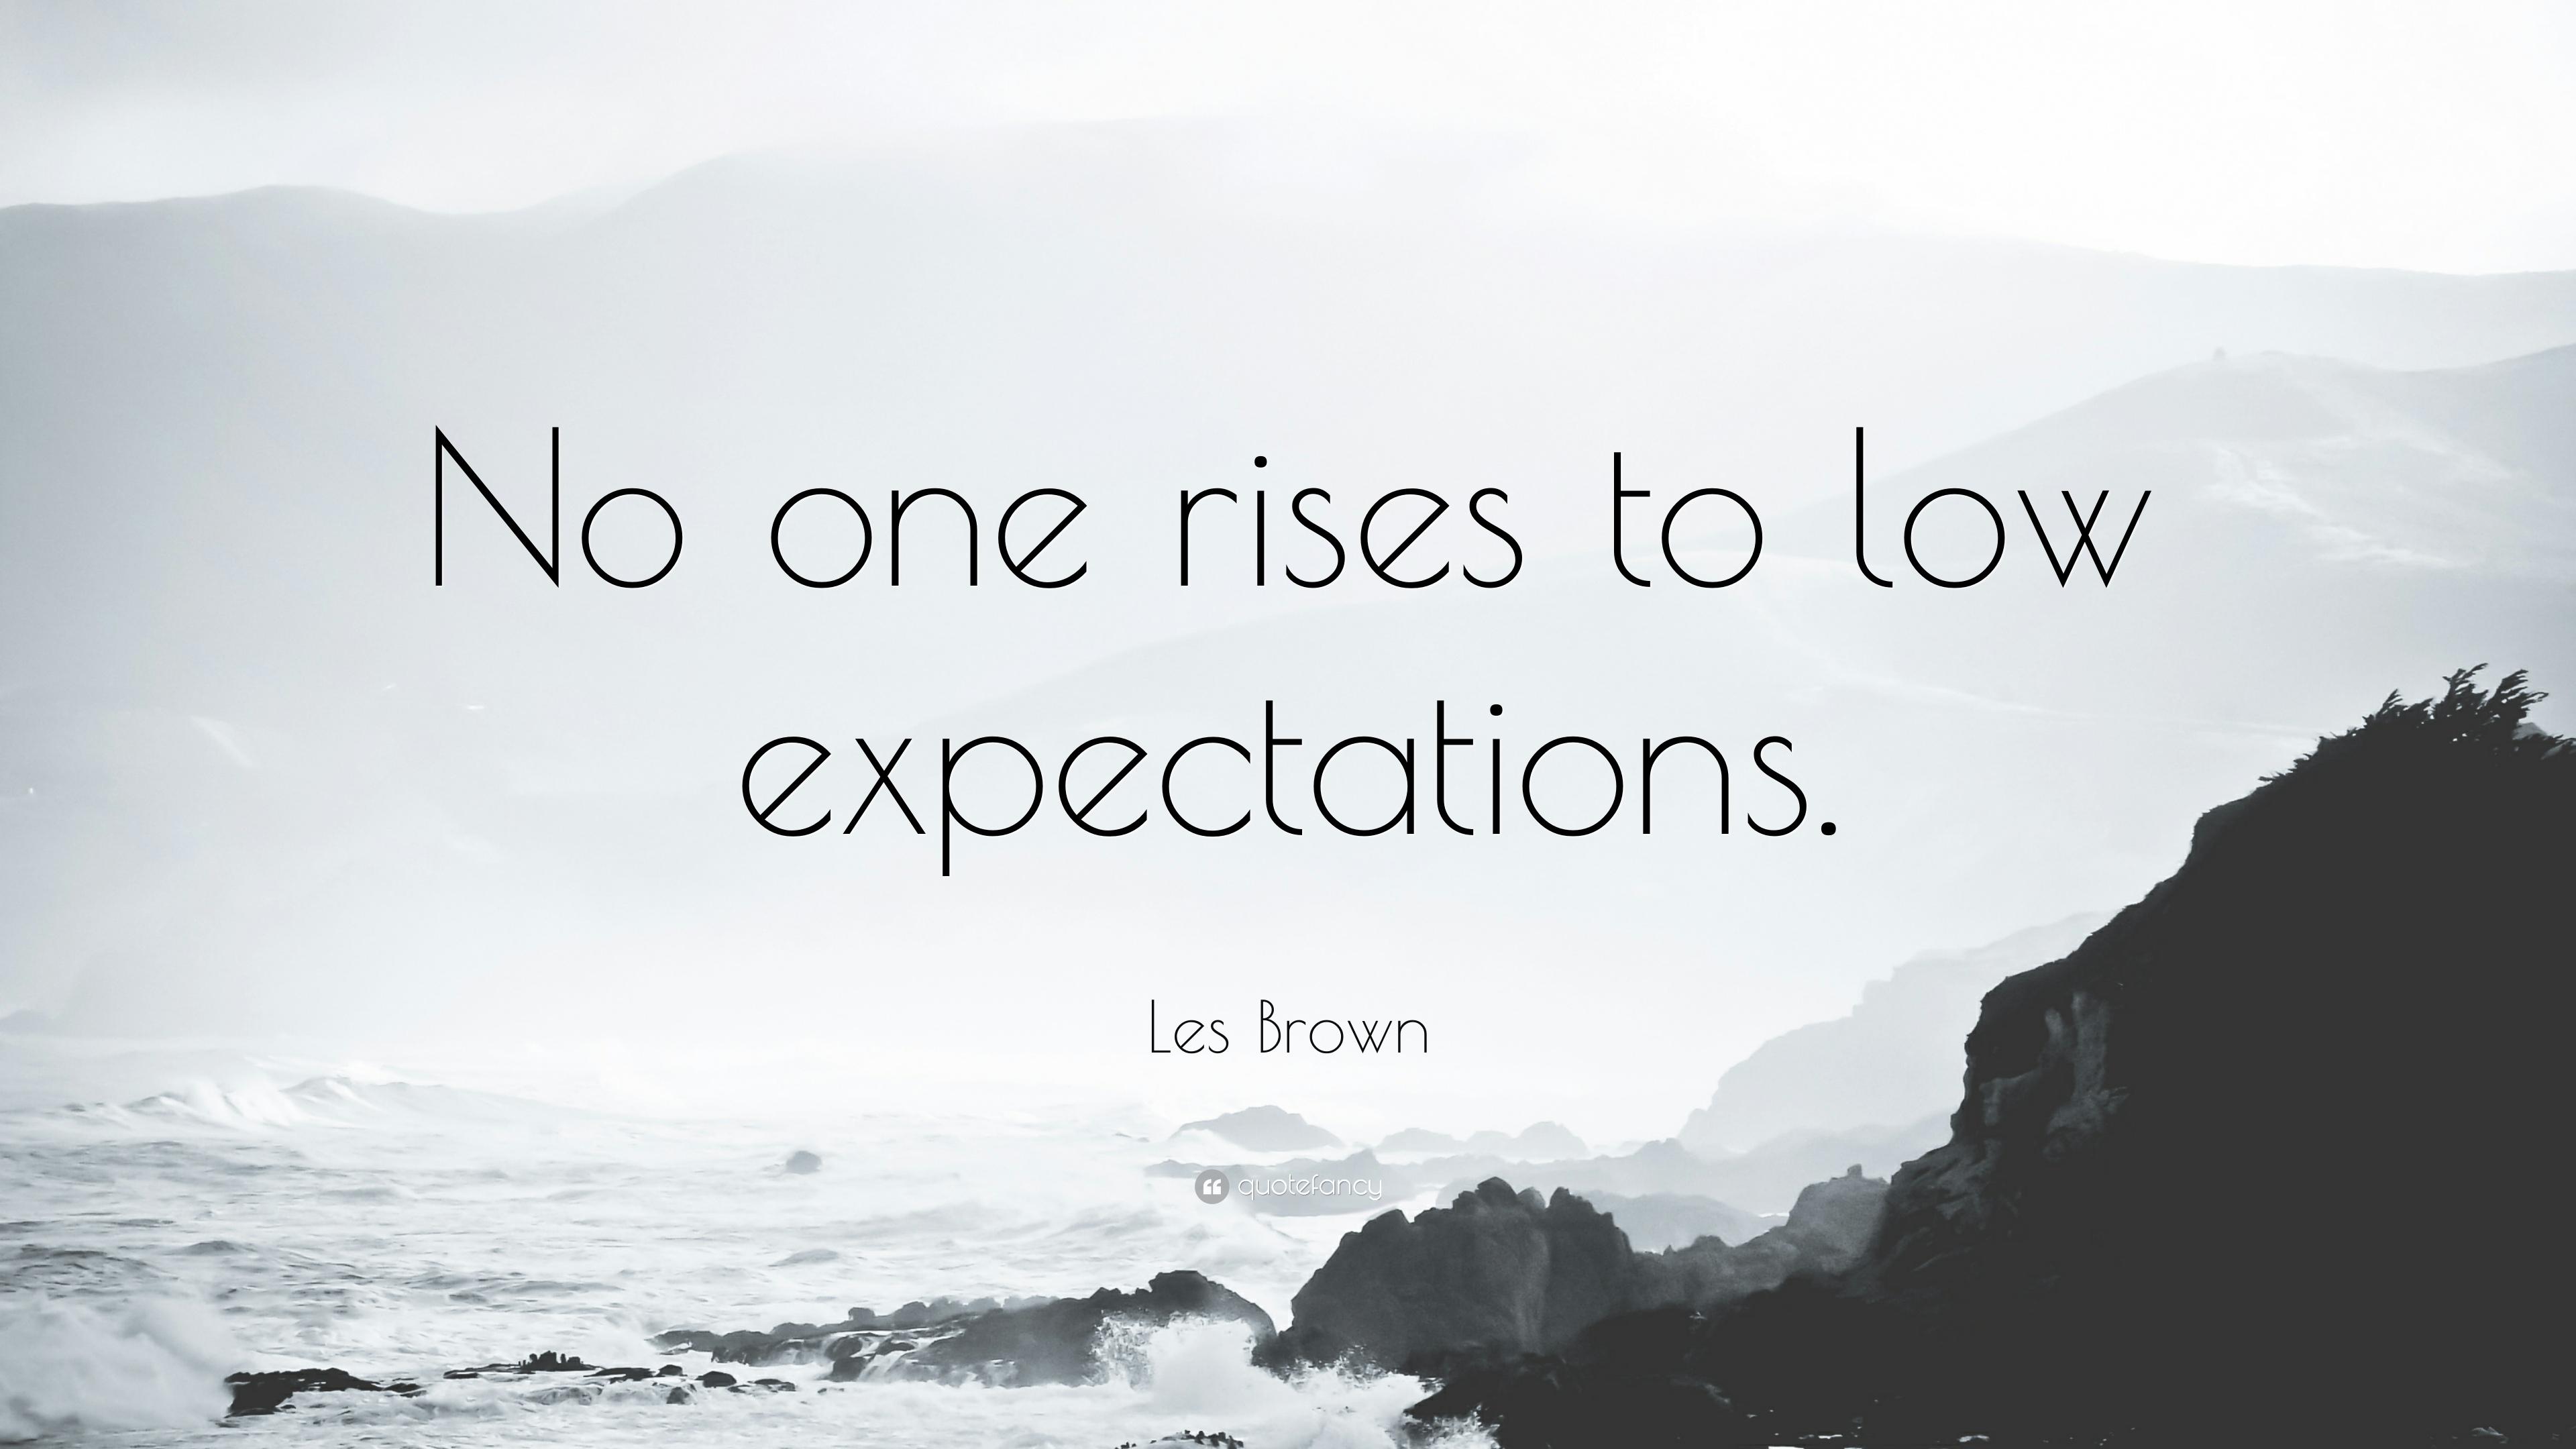 Les Brown Quote: “No one rises to low expectations.” 12